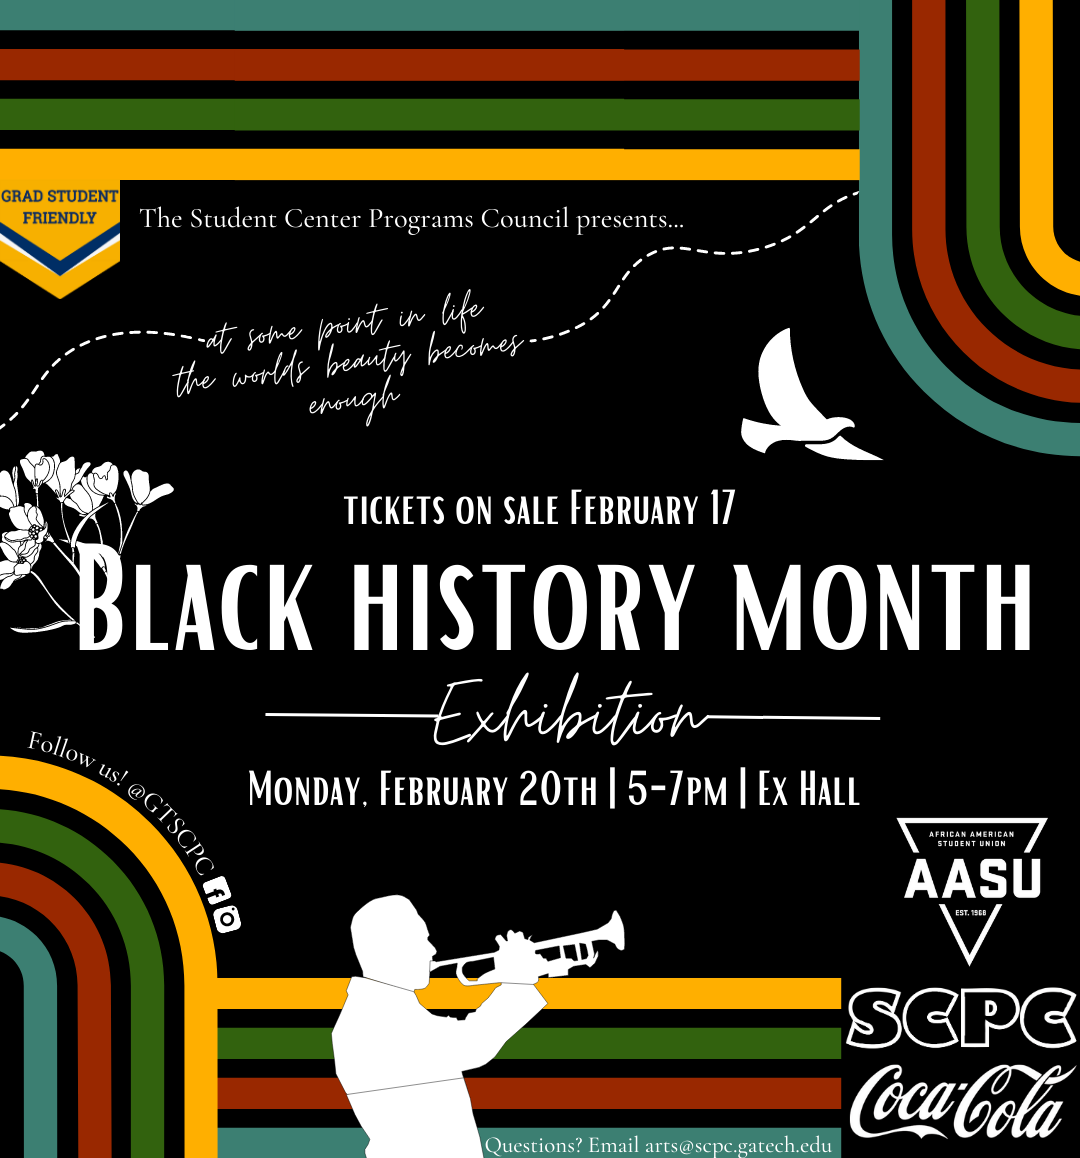 Looking to learn more about Black History Month and the rich history behind what makes the month of February so powerful? Please join us February 20th from 5-7 pm at Exhibition hall for our Black History Month Exhibition! This event is a self-guided exhibit to learn more about black historical figures/events from Louis Armstrong to the Black Arts Movement, participate in activities relating to the historical figures/events such as painting and flower crown making, and enjoy student-led performances such a